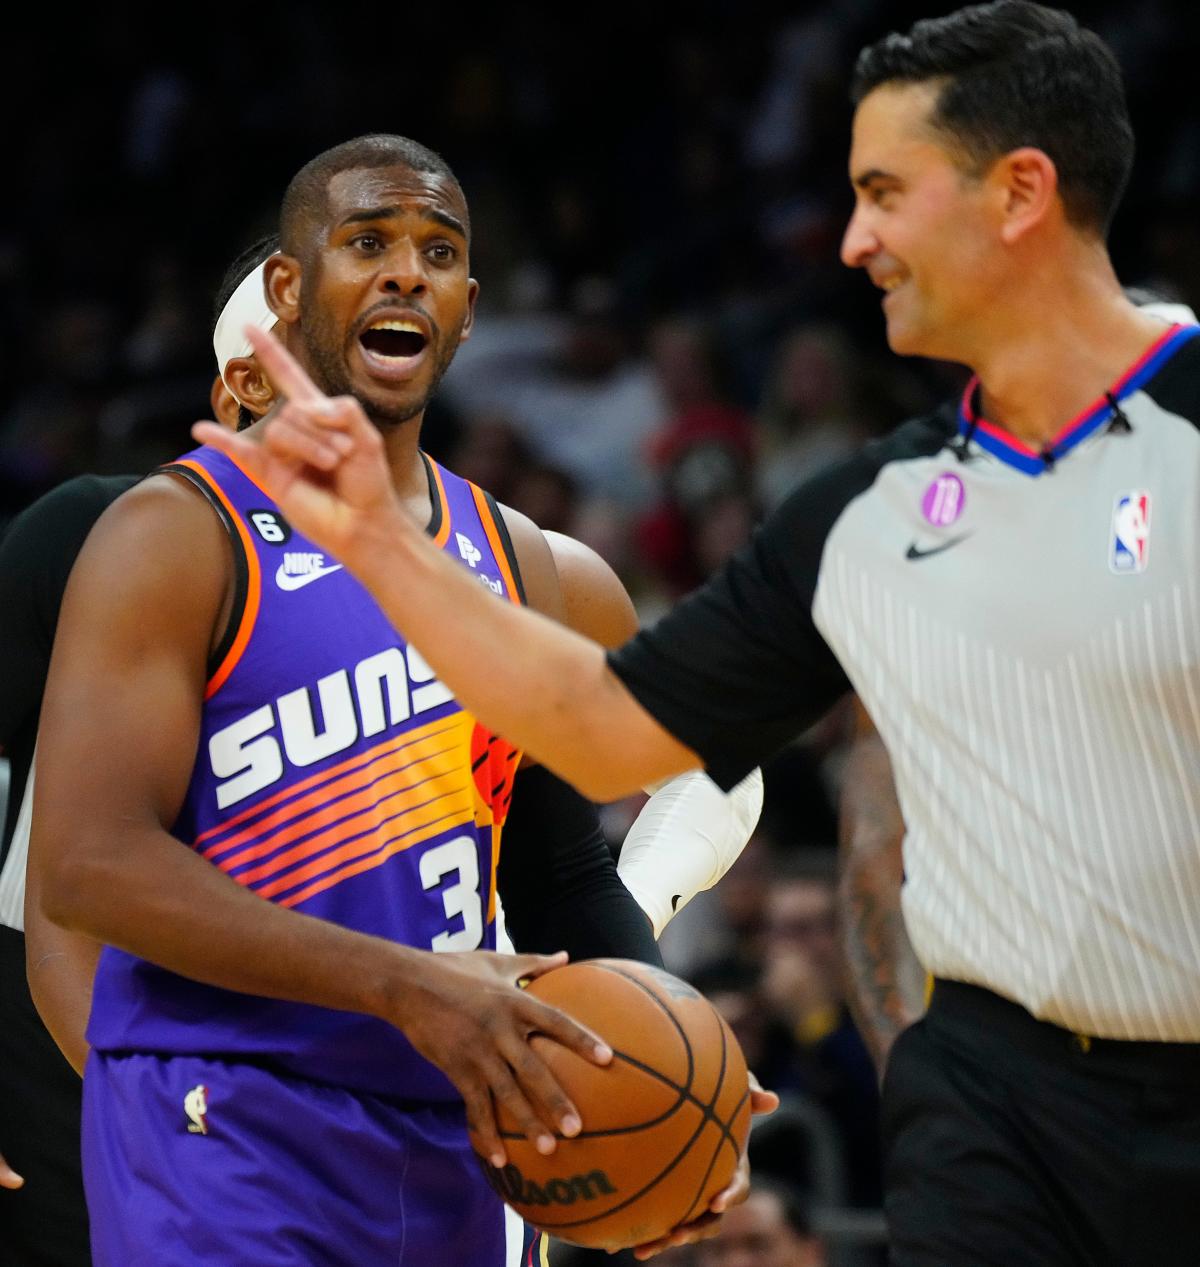 Next 5 Suns face youthful Rockets before showdowns with TWolves